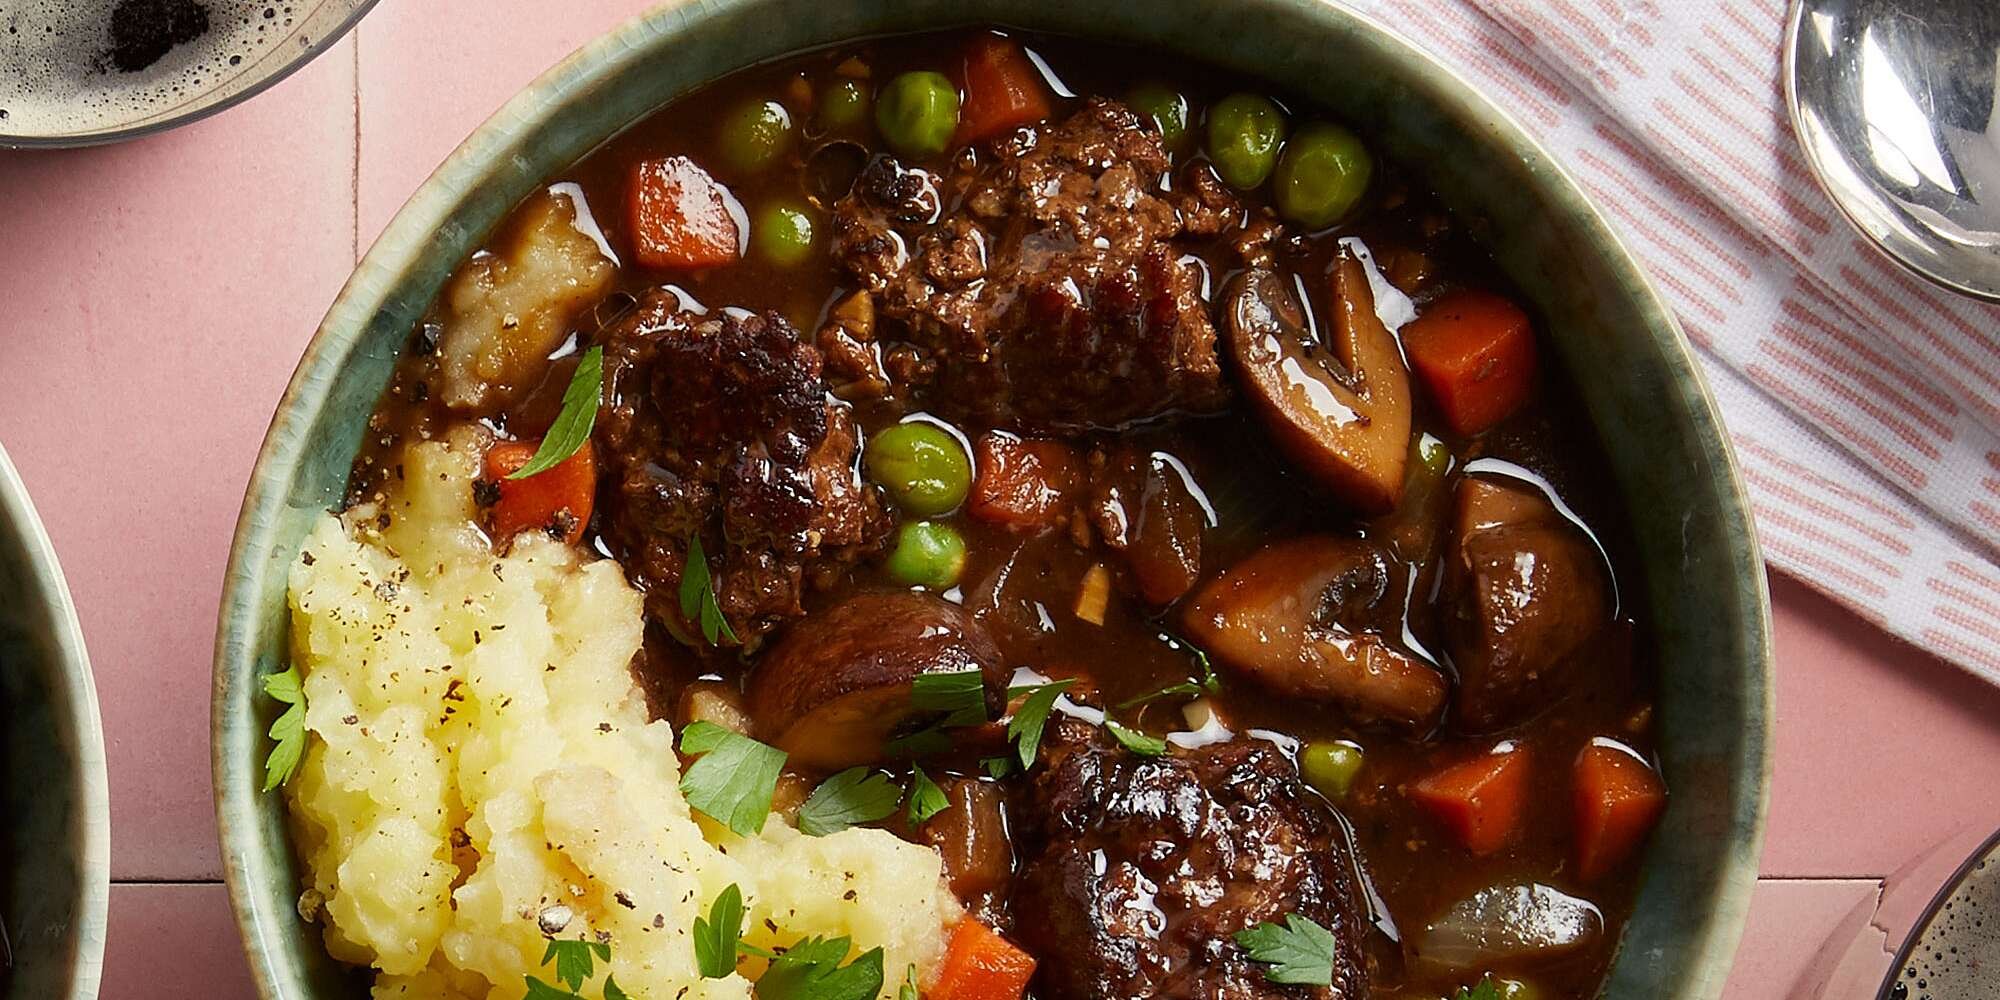 Beef & Mushroom Stew with Mashed Potatoes